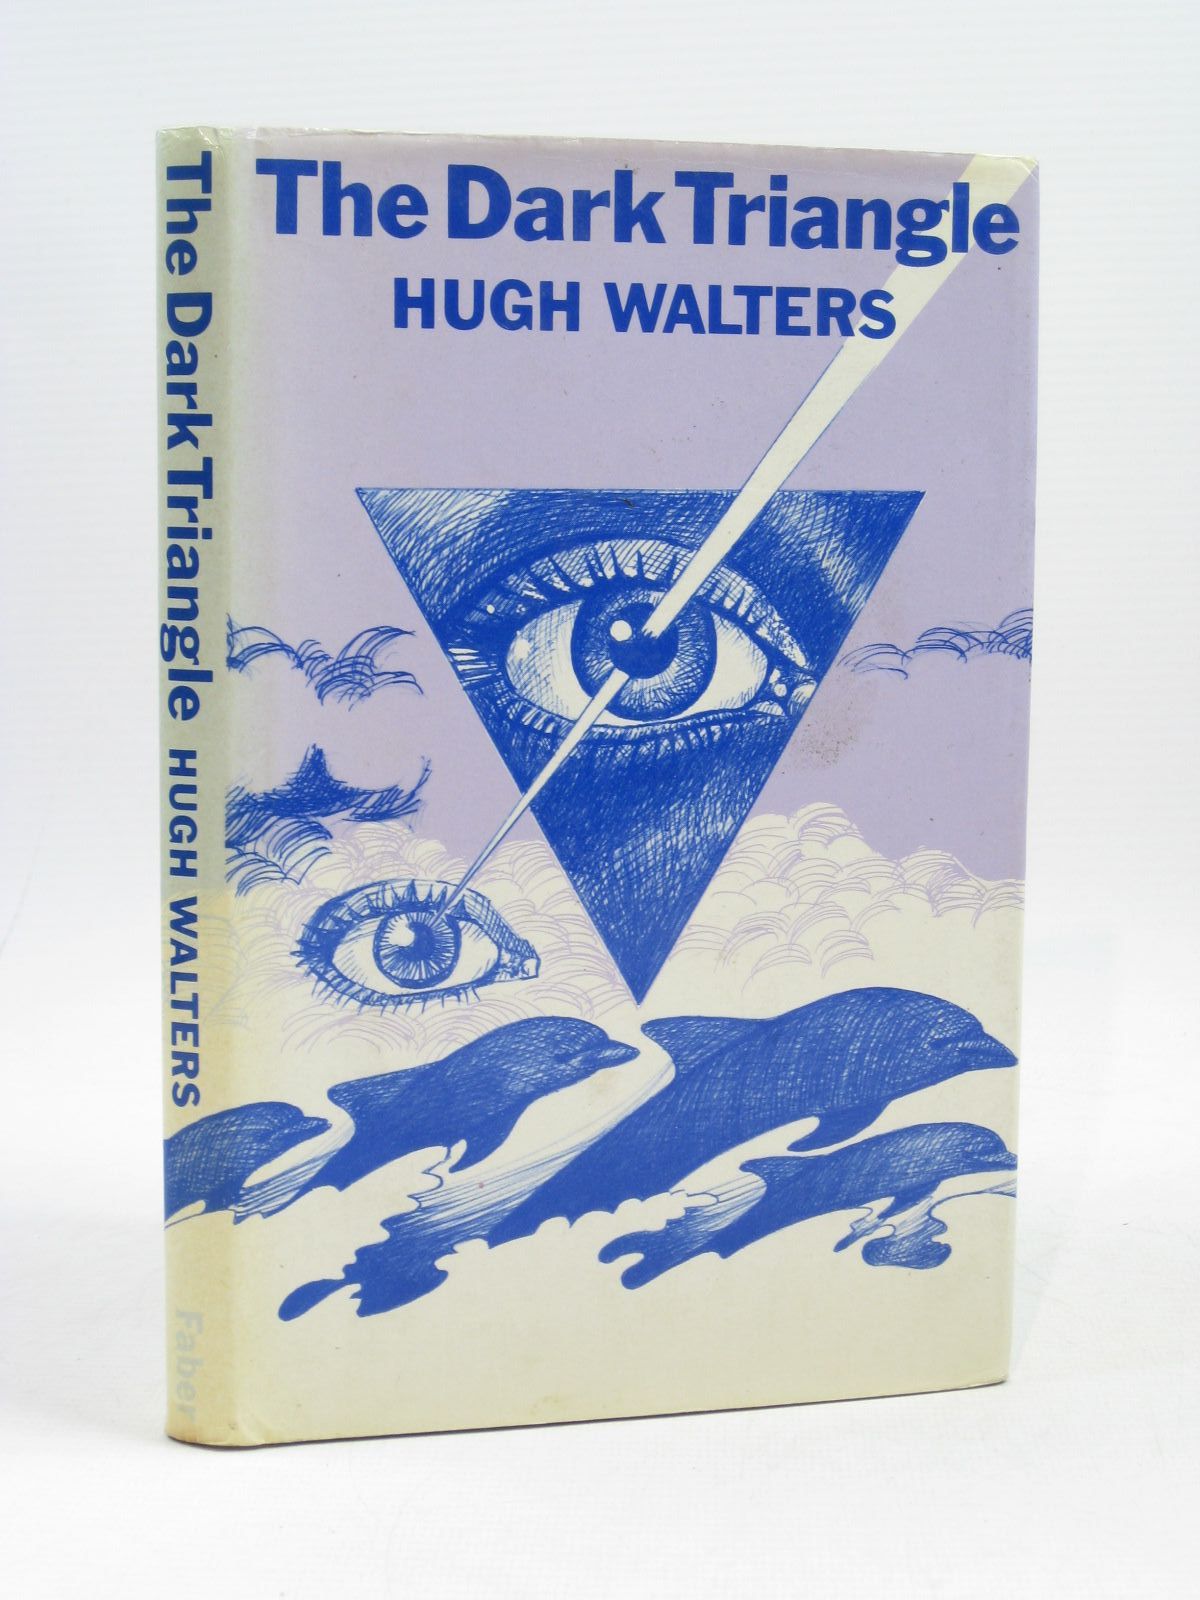 Cover of THE DARK TRIANGLE by Hugh Walters